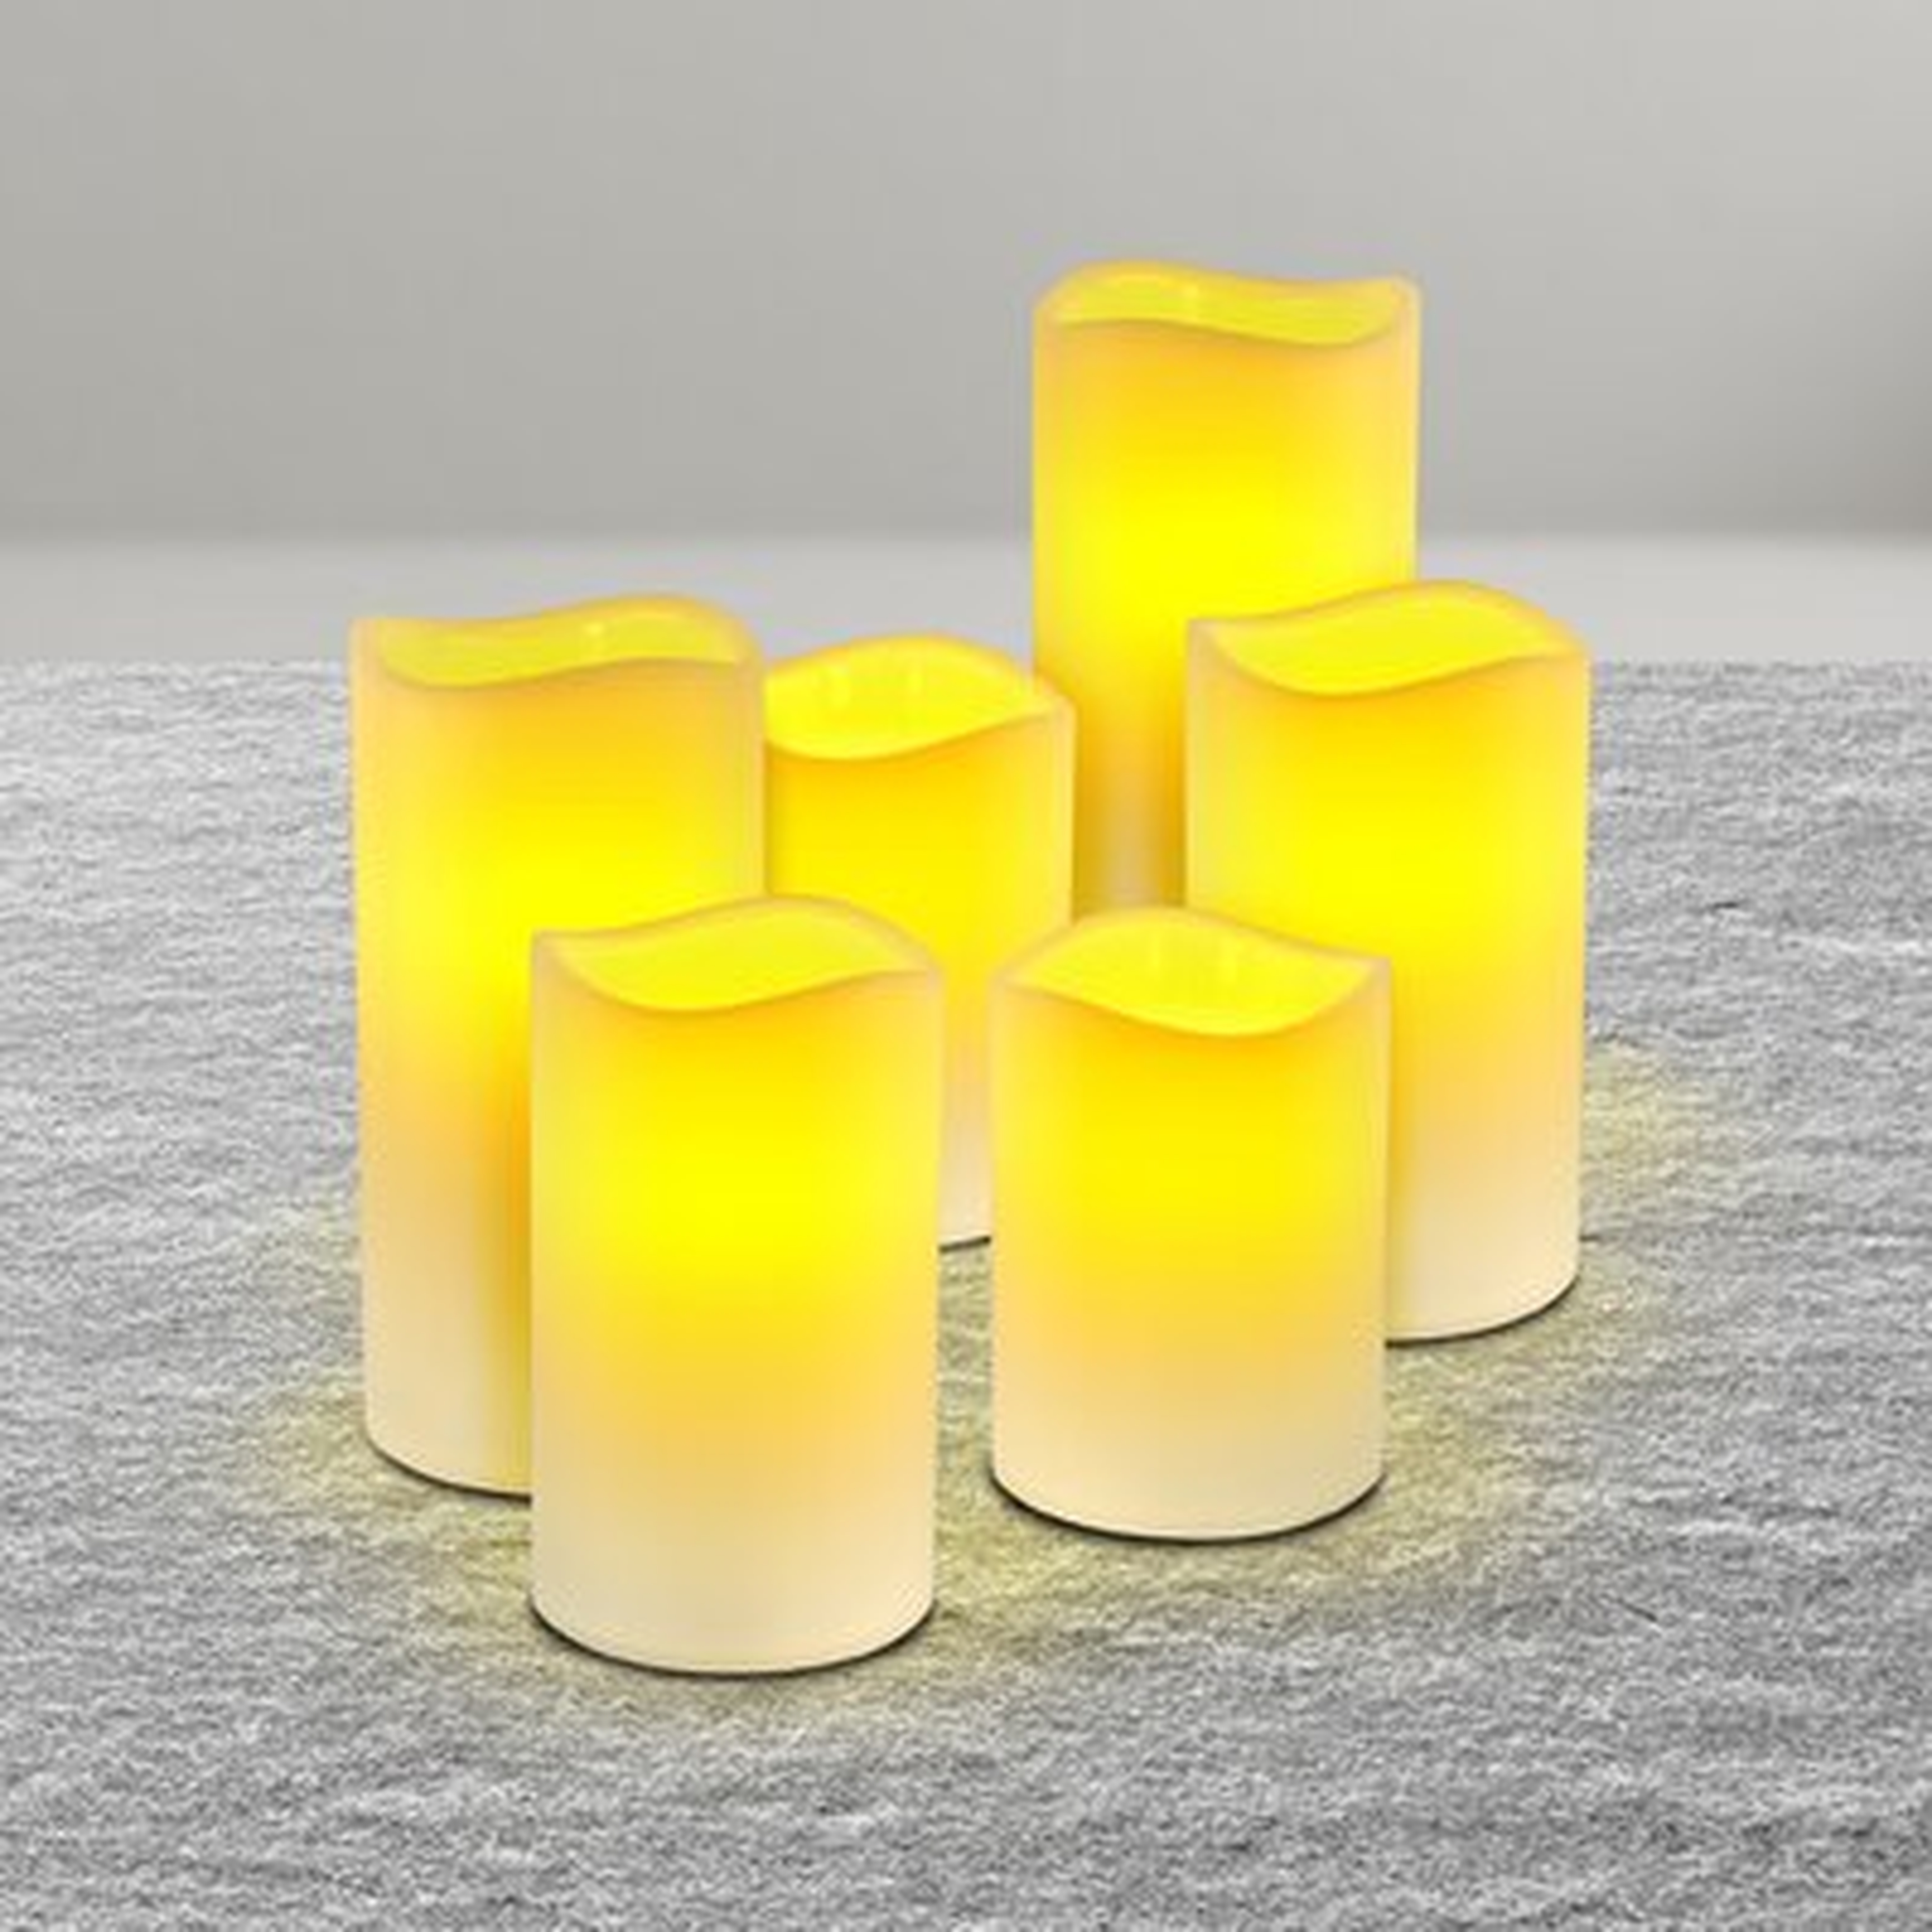 6 Piece Flameless Candles With Remote Control - Wayfair